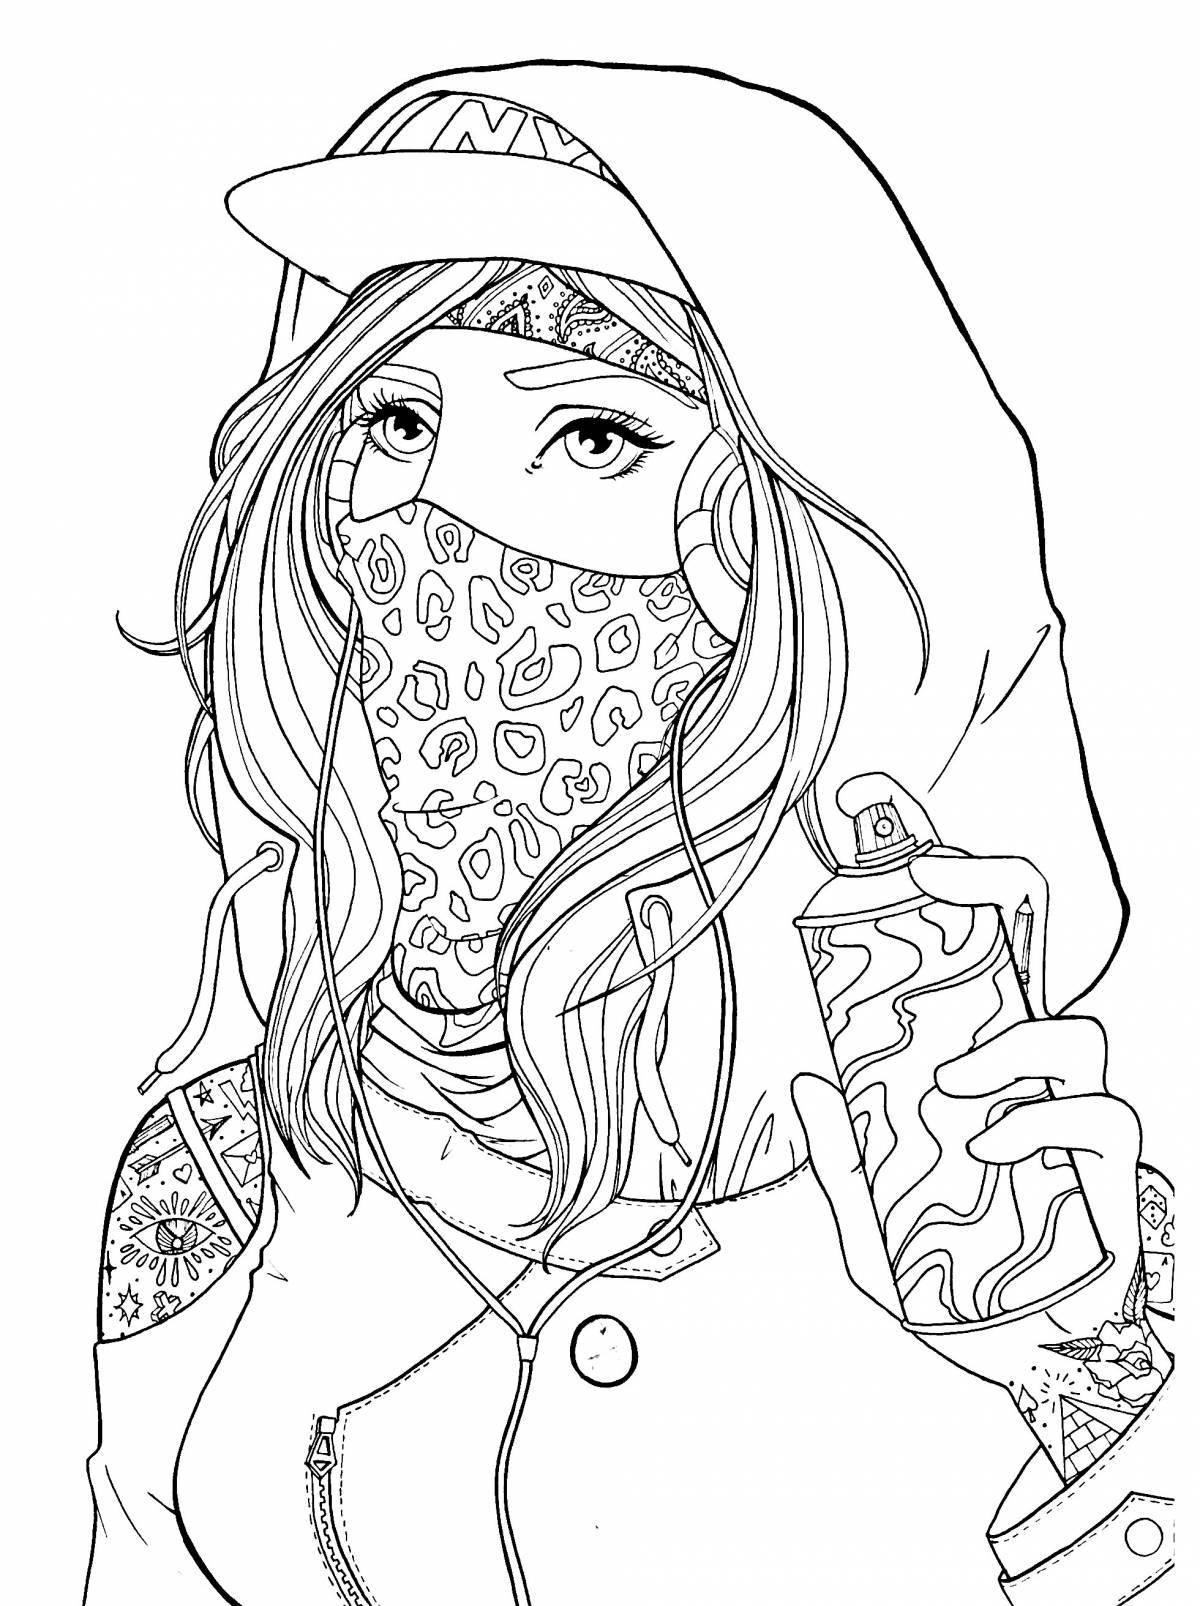 Fun coloring page for girls 12 years old cool lp